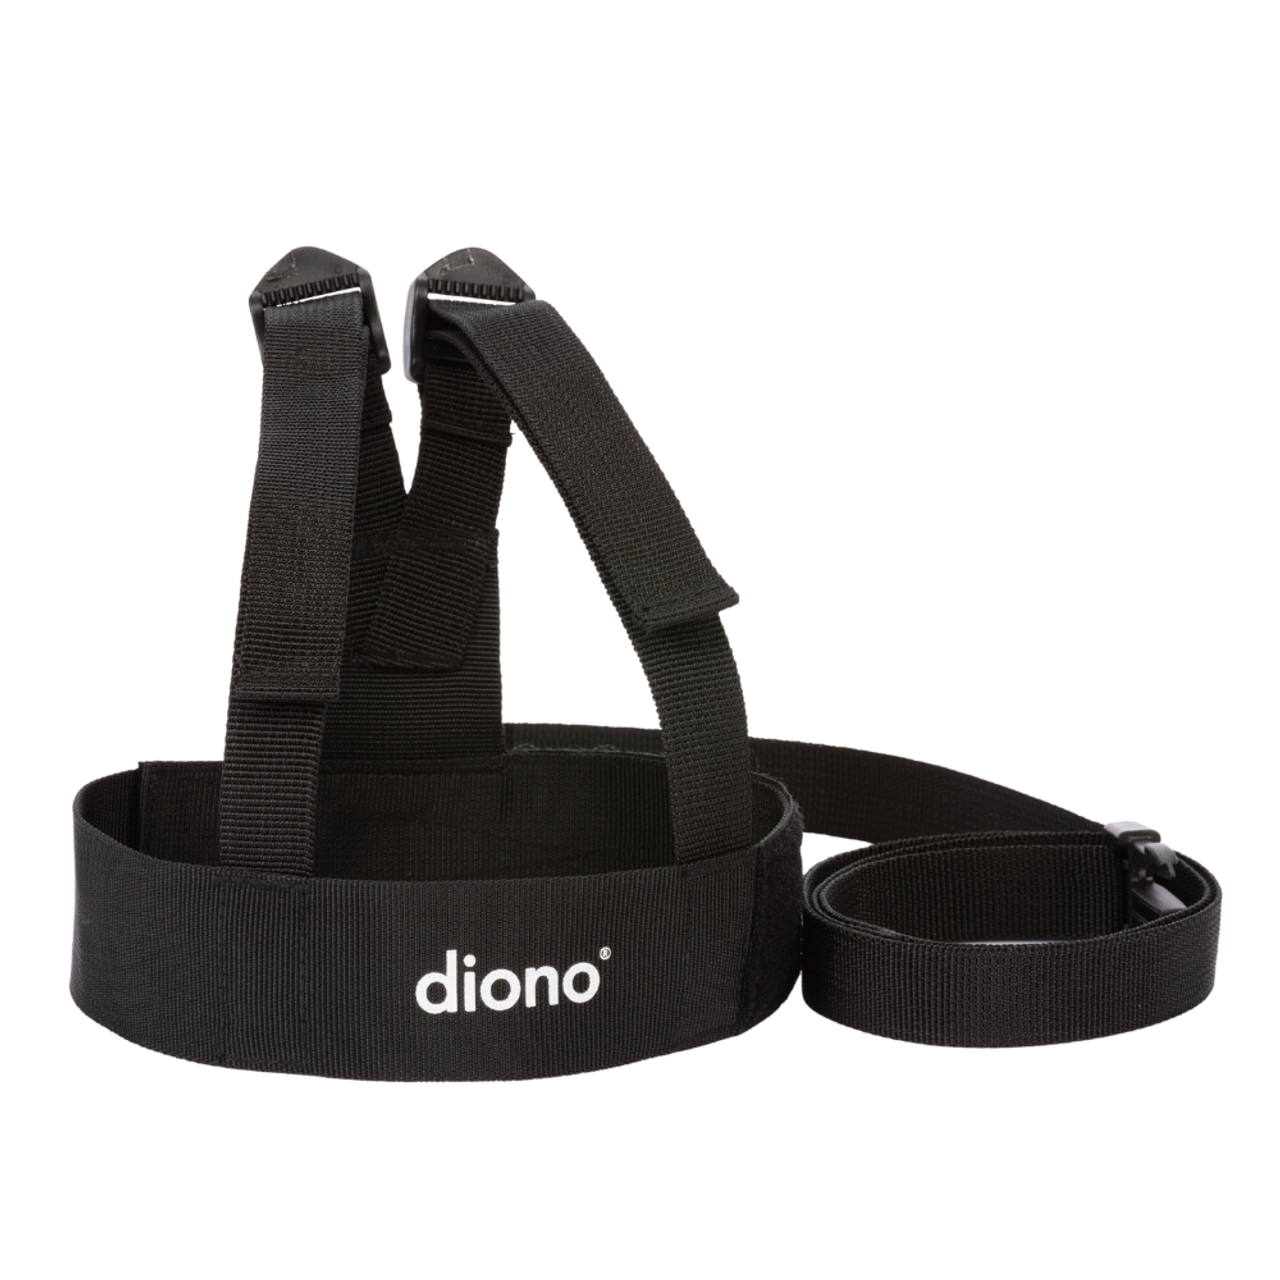 Diono Bear Character Kids Mini Back Pack Toddler Leash & Harness for Child Safety With Padded Shoulder Straps For Child Comfort 